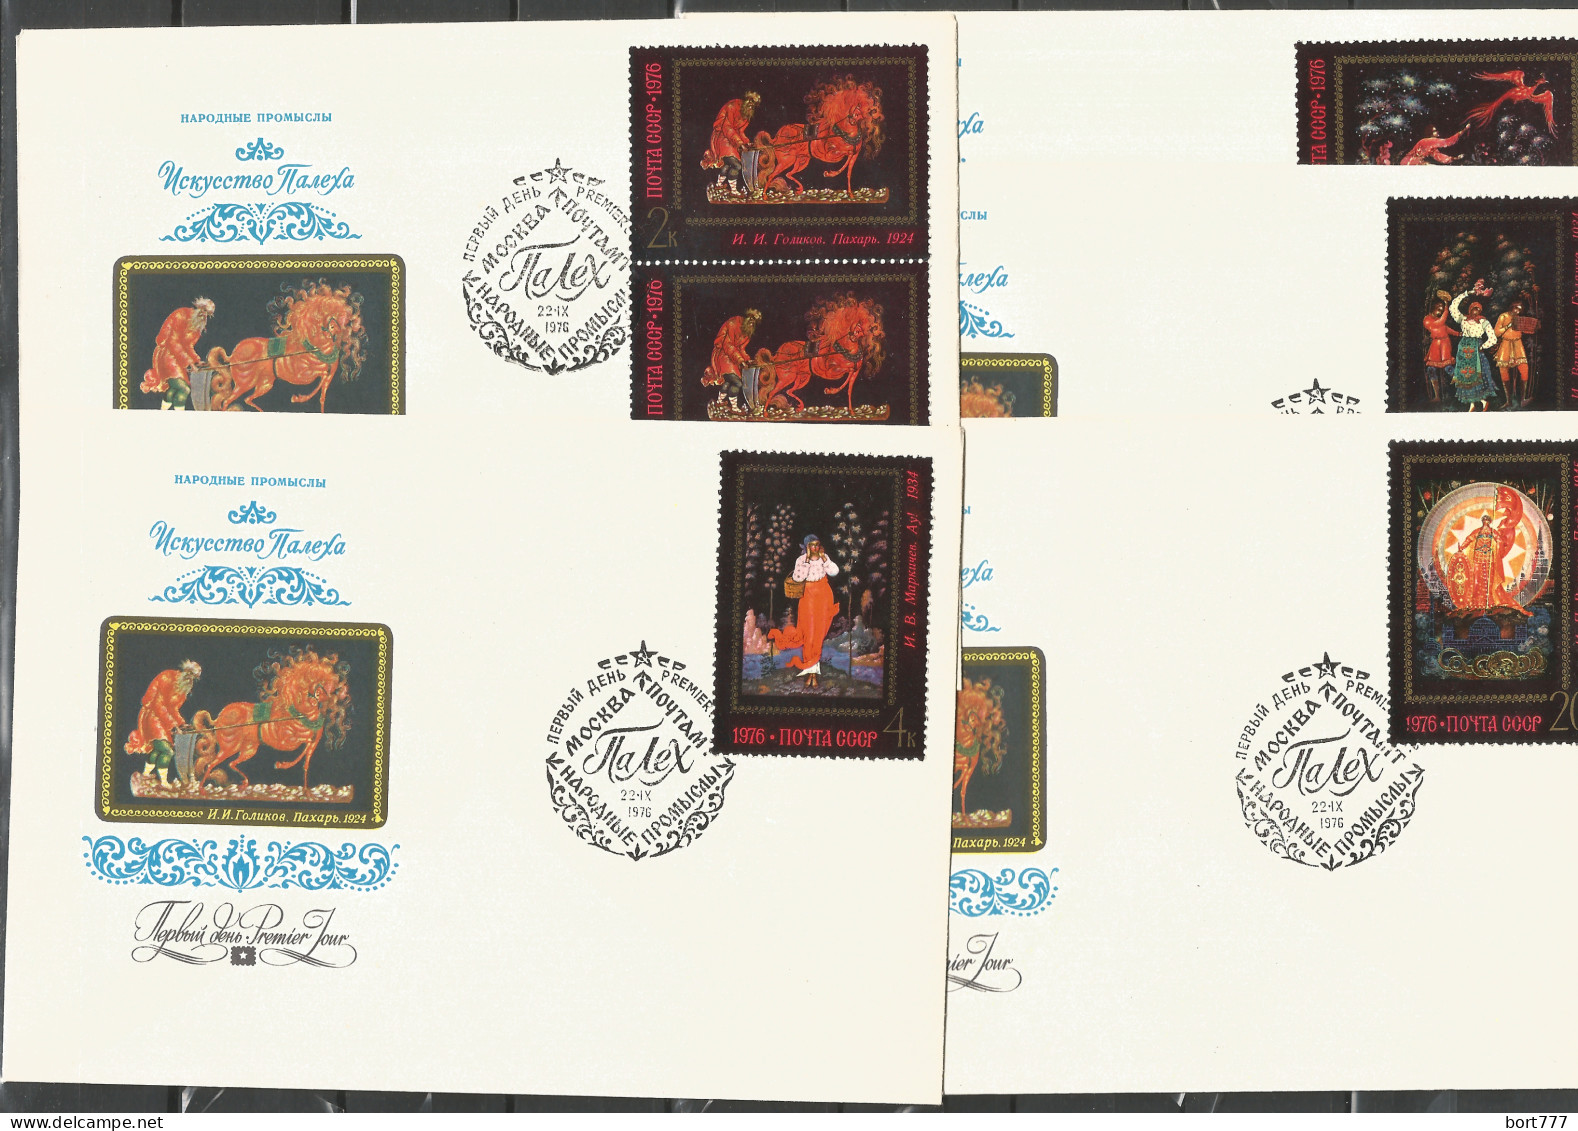 RUSSIA - 5 COVERS FDC - ART 1976 - FDC